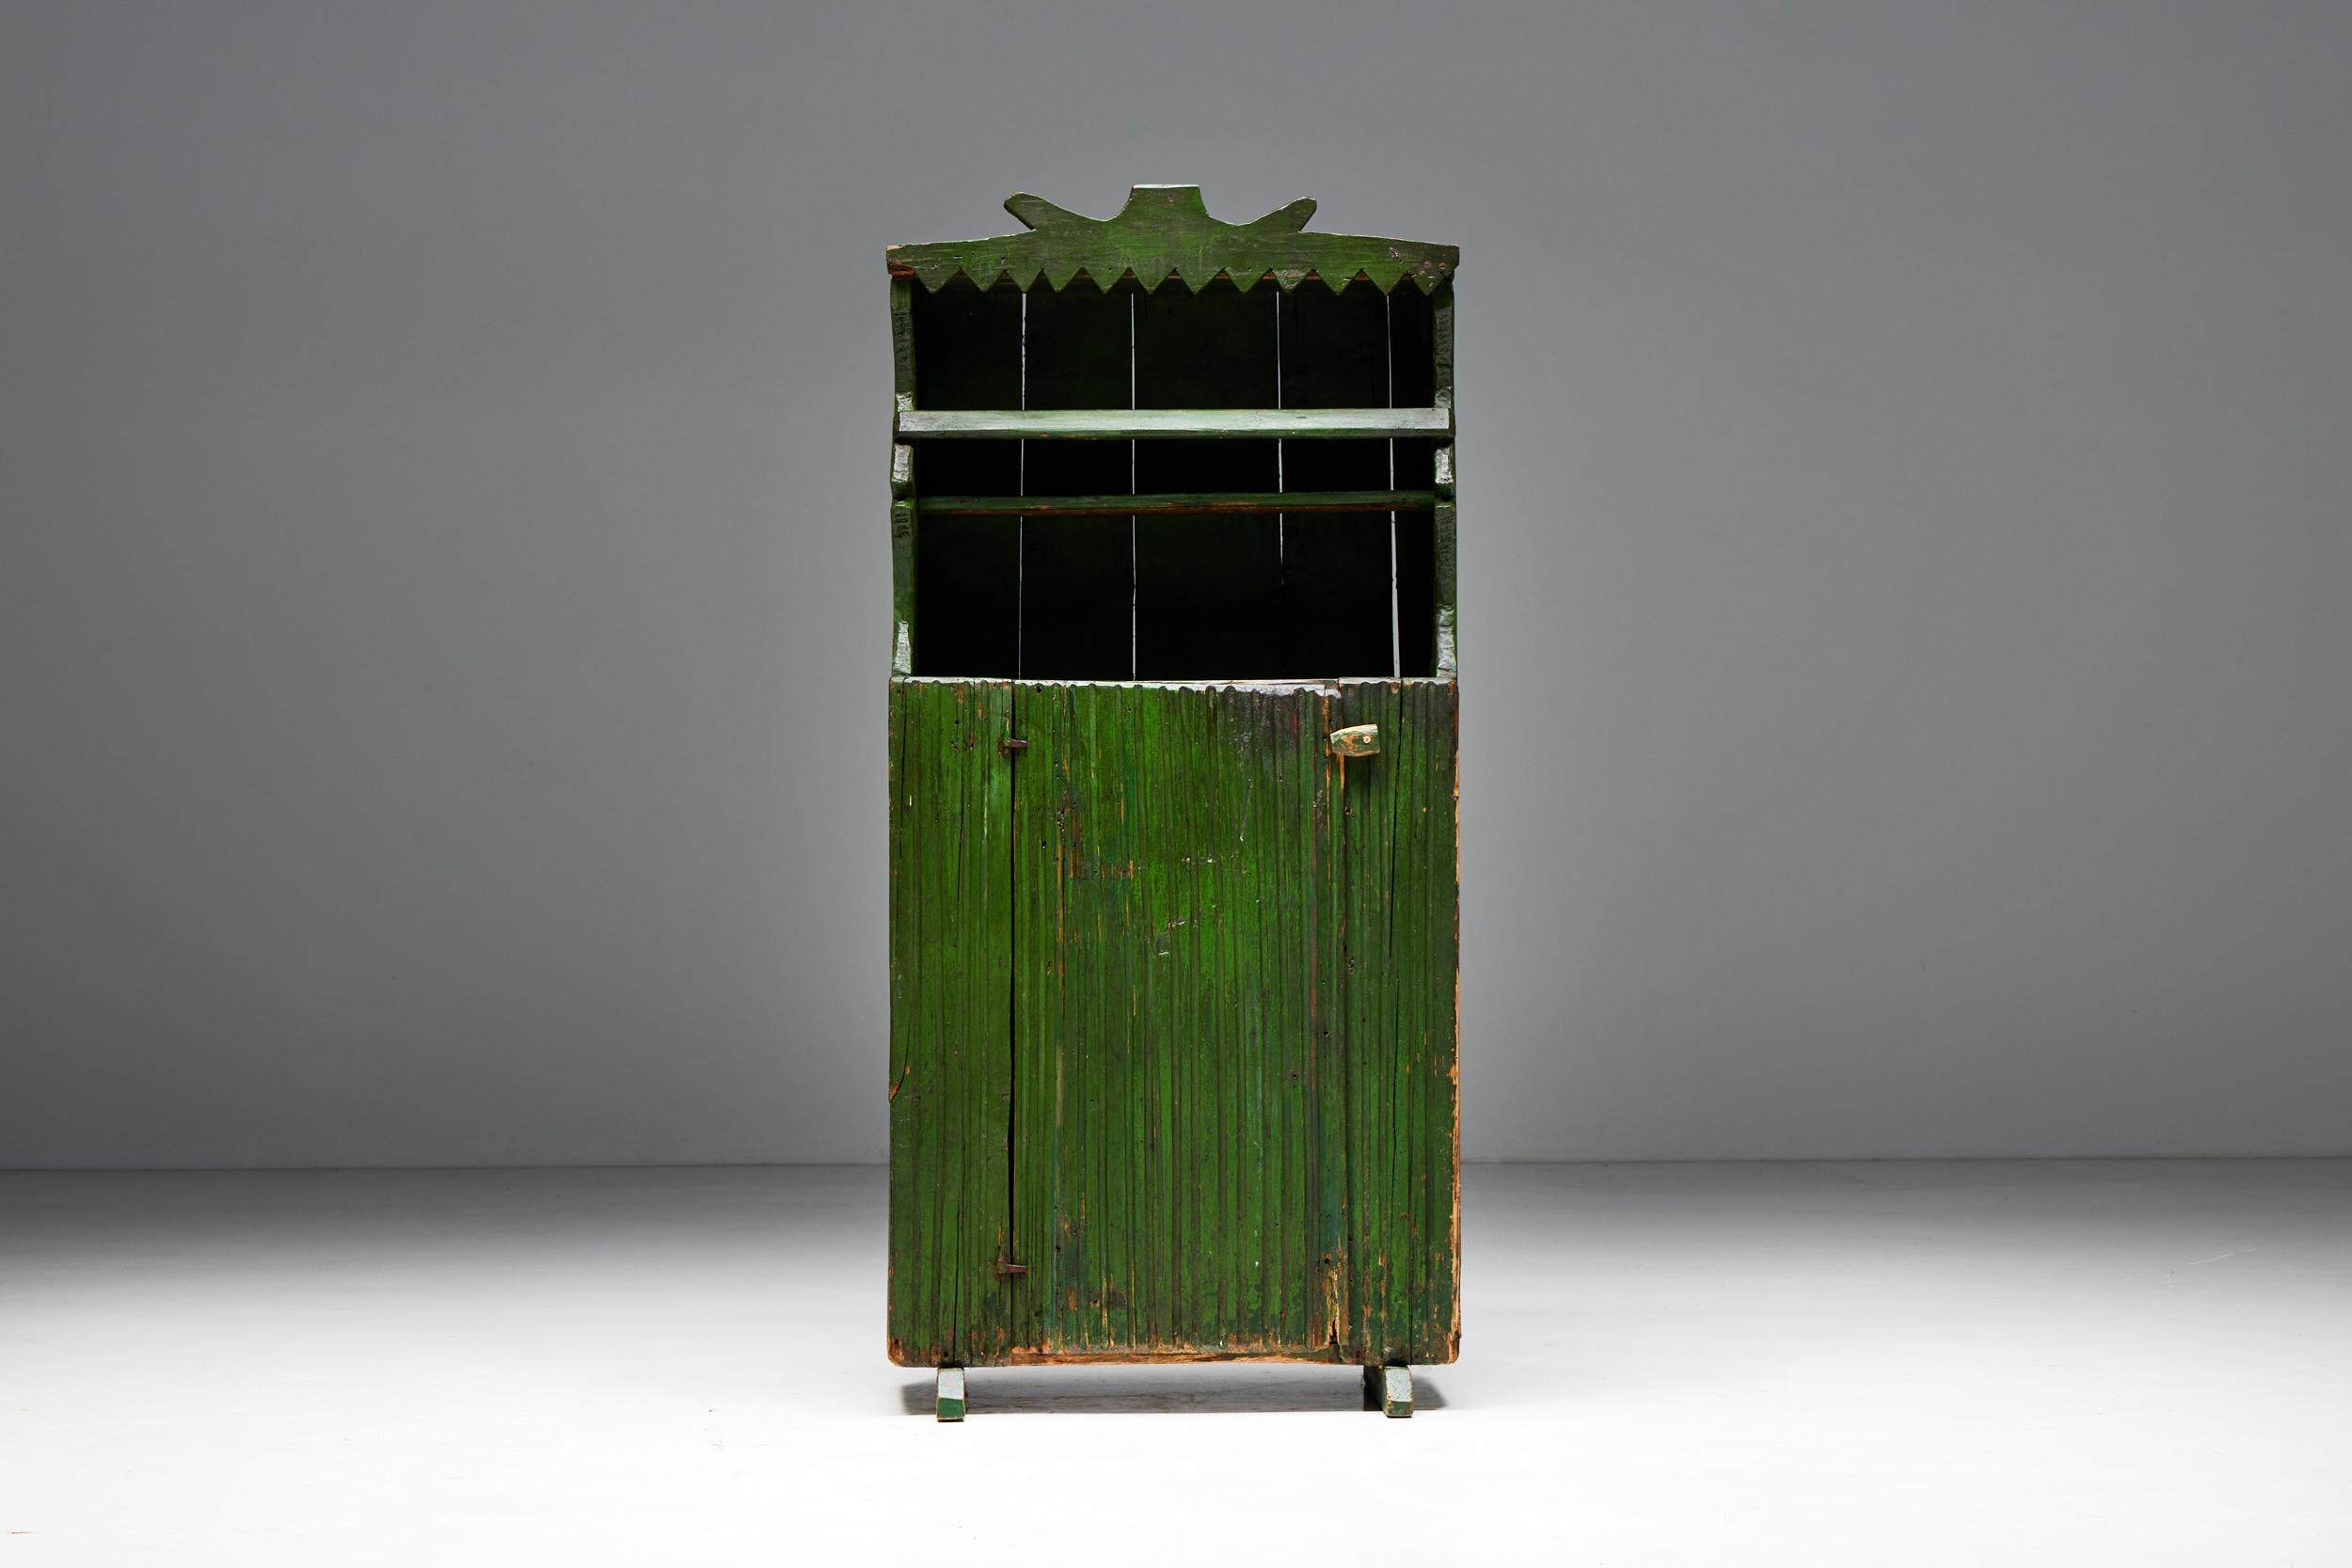 Folk Art; Art Populaire; Cabinet; Sideboard; Buffet; Rustic; Early 20th Century;

Folk art cabinet in a fascinating shade of green, a perfect blend of functionality and aesthetics. Behind the discreetly designed door, you will discover a hidden